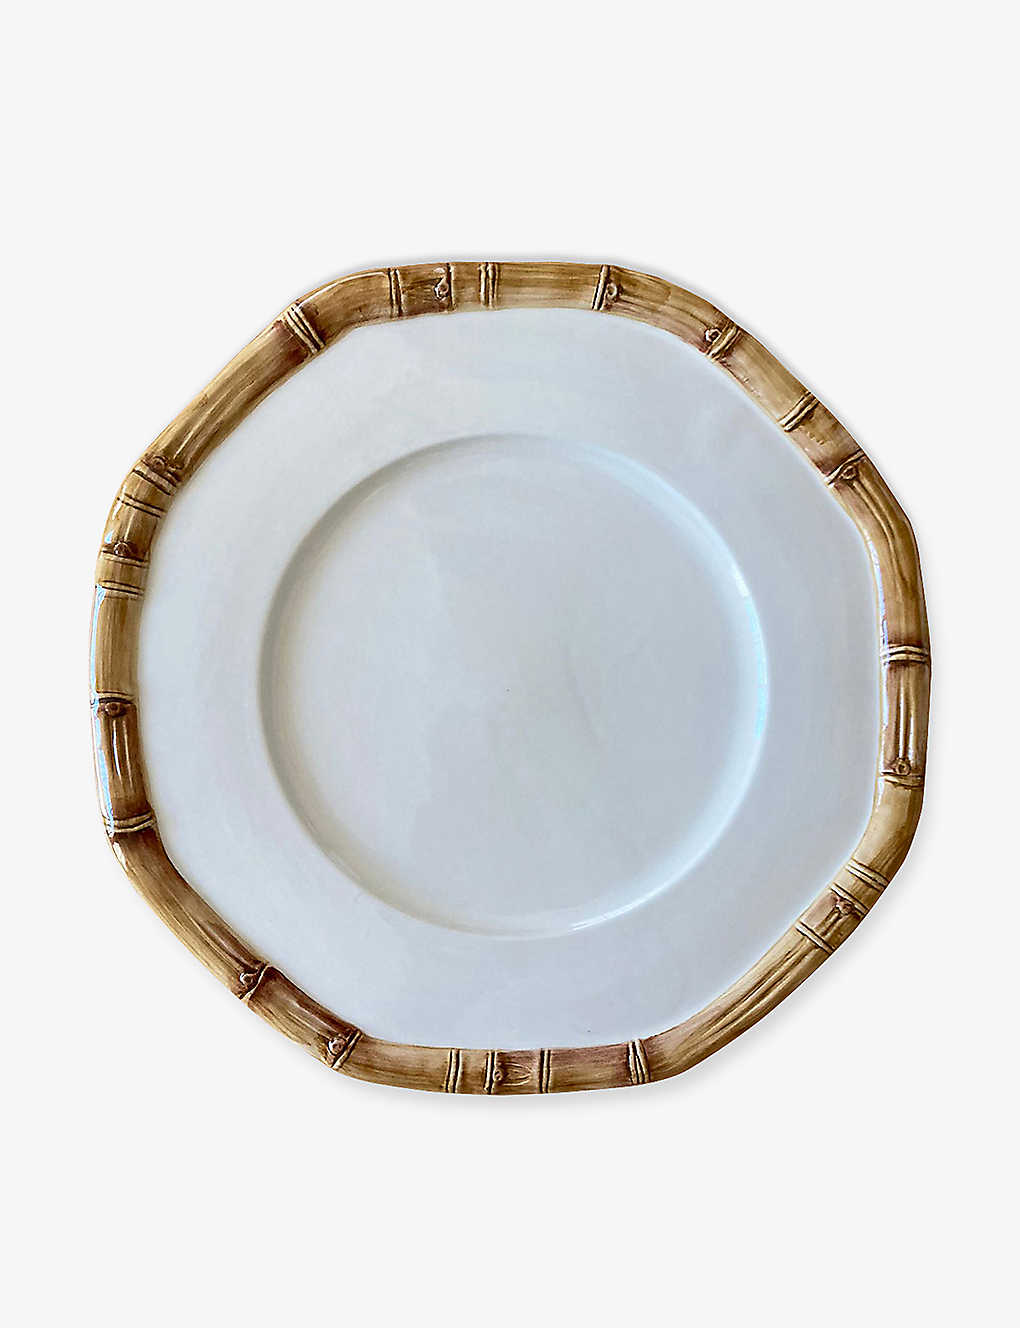 Les Ottomans Beige Bamboo Hand-painted Ceramic Dinner Plate 27cm